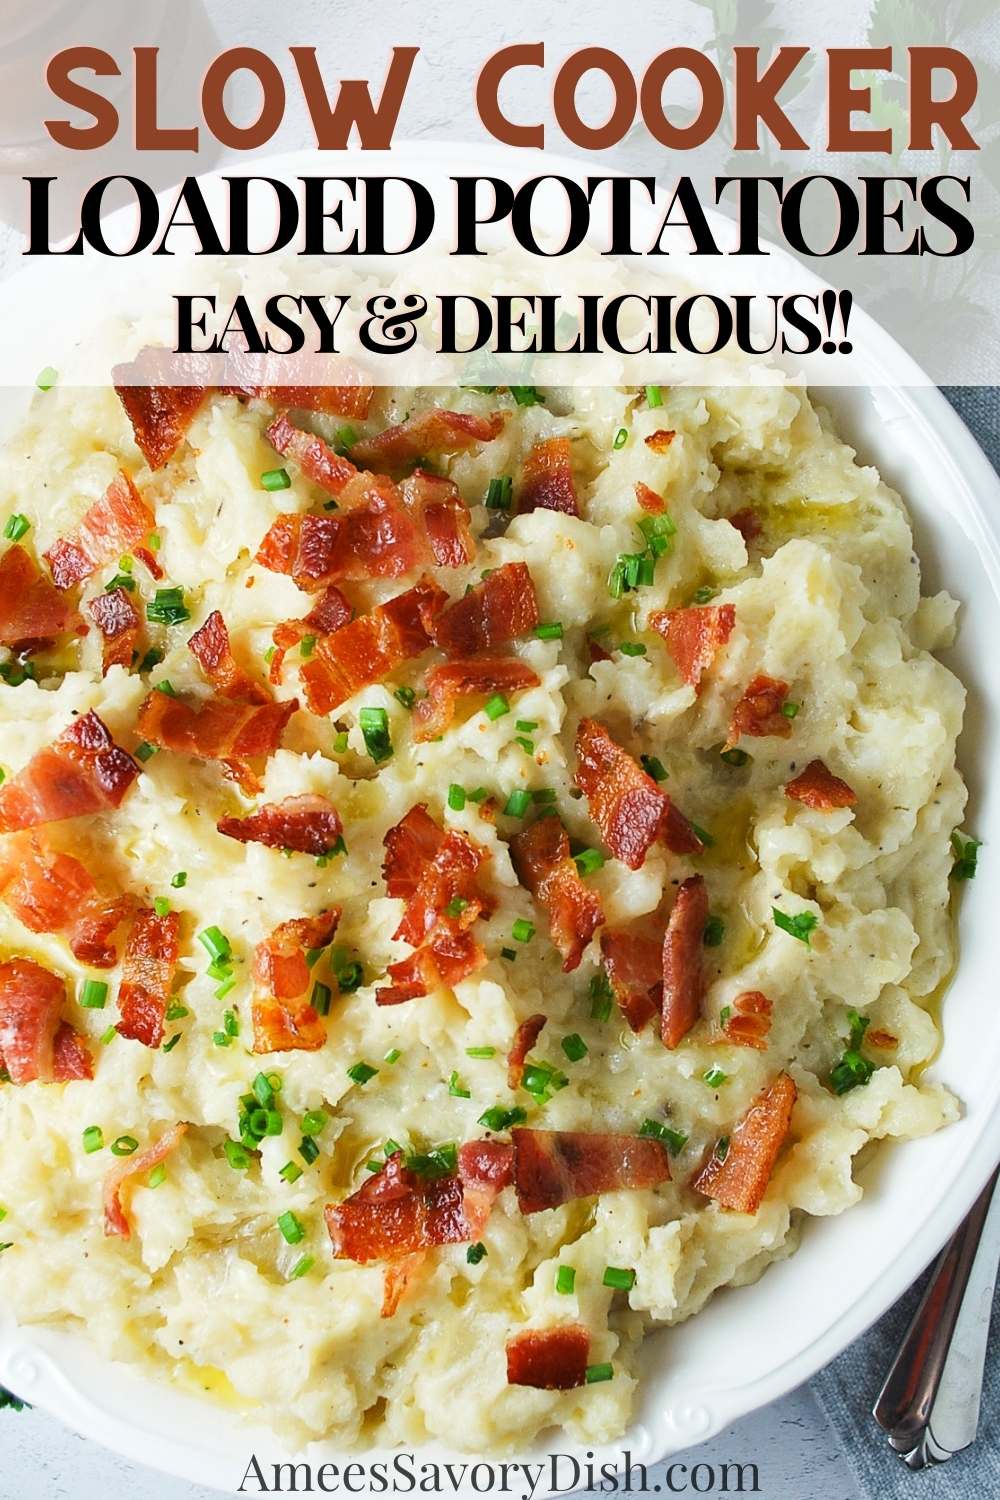 This AMAZING Slow Cooker Loaded Potatoes recipe takes classic loaded baked potato toppings and mixes them with delicious slower cooker mashed potatoes -an effortless side dish LOADED with flavor. via @Ameessavorydish